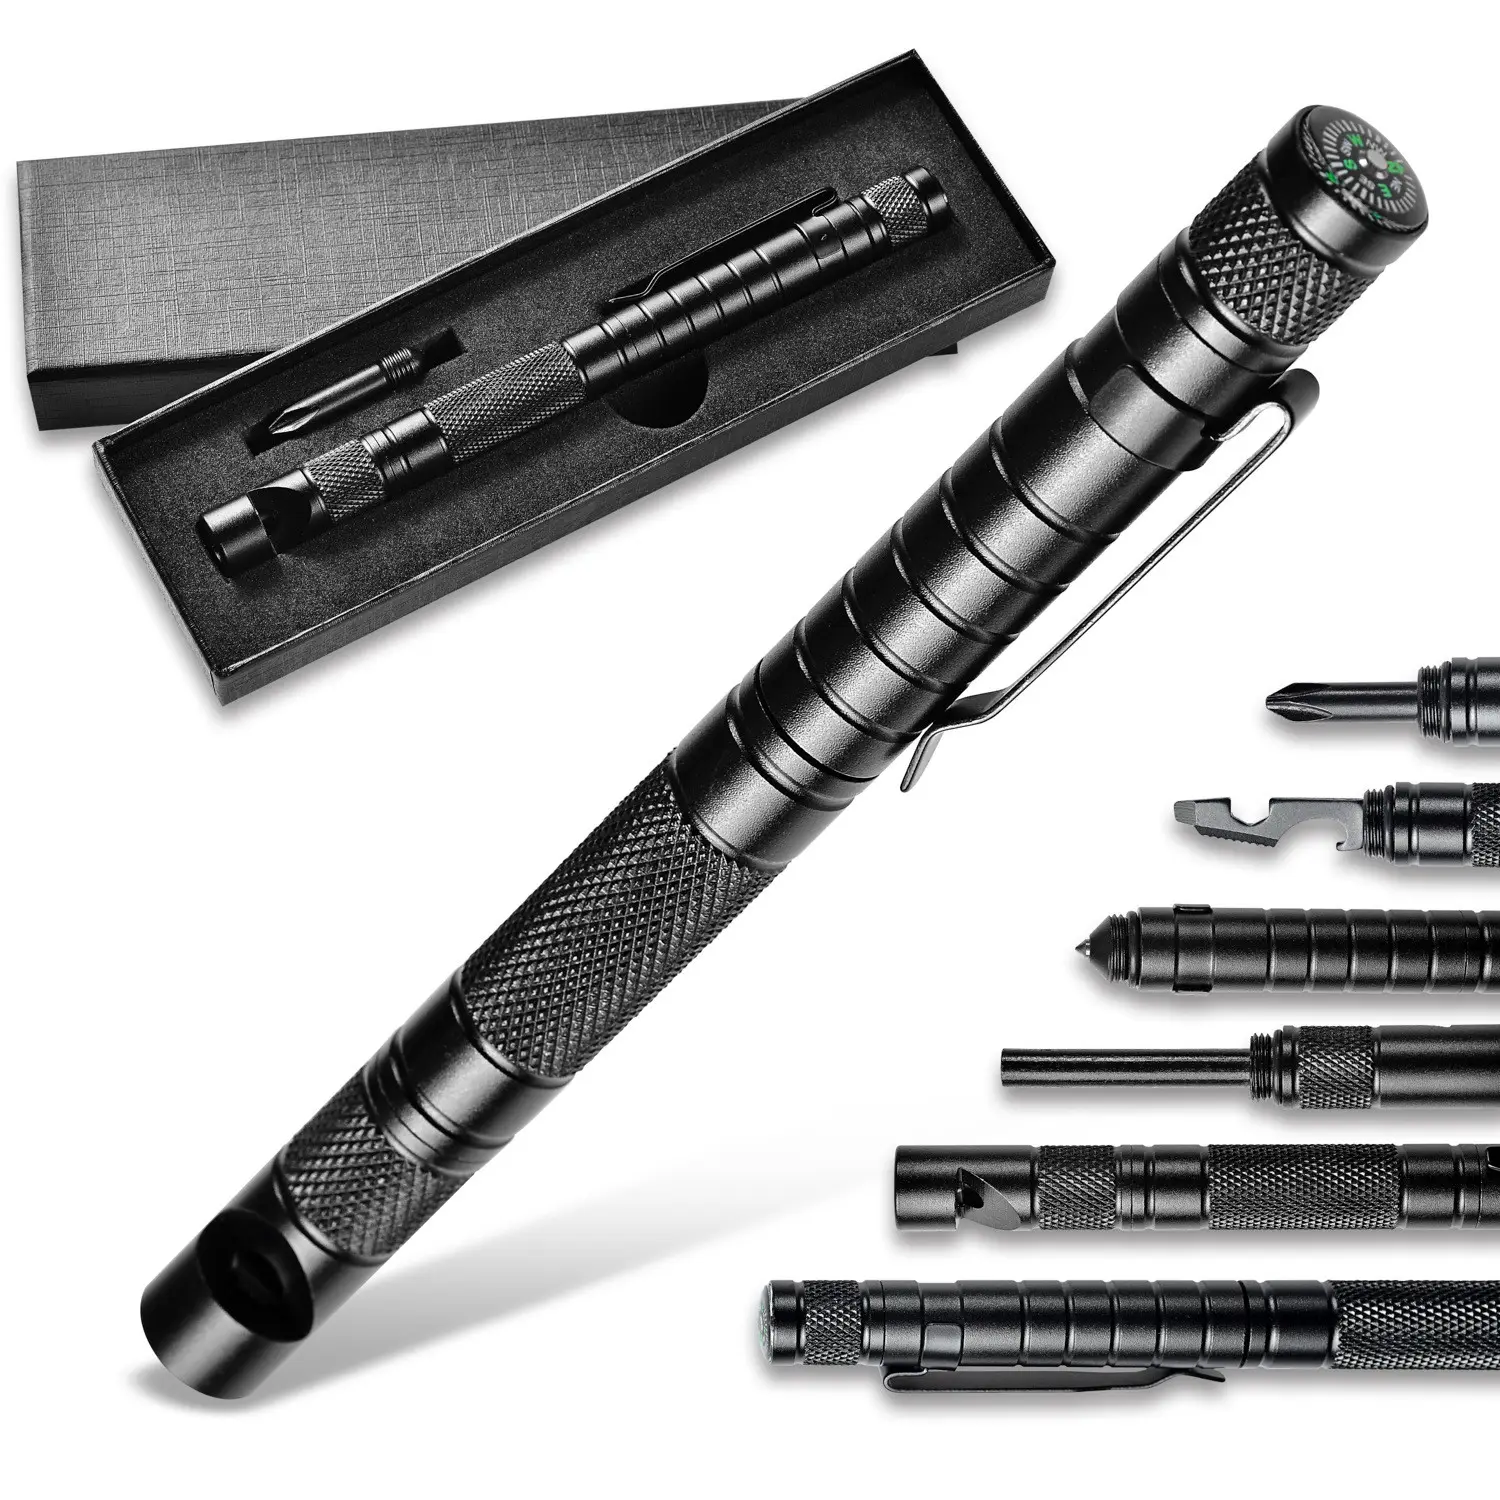 The Most Loaded 10 In 1 Aluminum alloy Camping Pen With Self Defense Tip Flashlight Ballpoint Bottle Opener Screw Driver